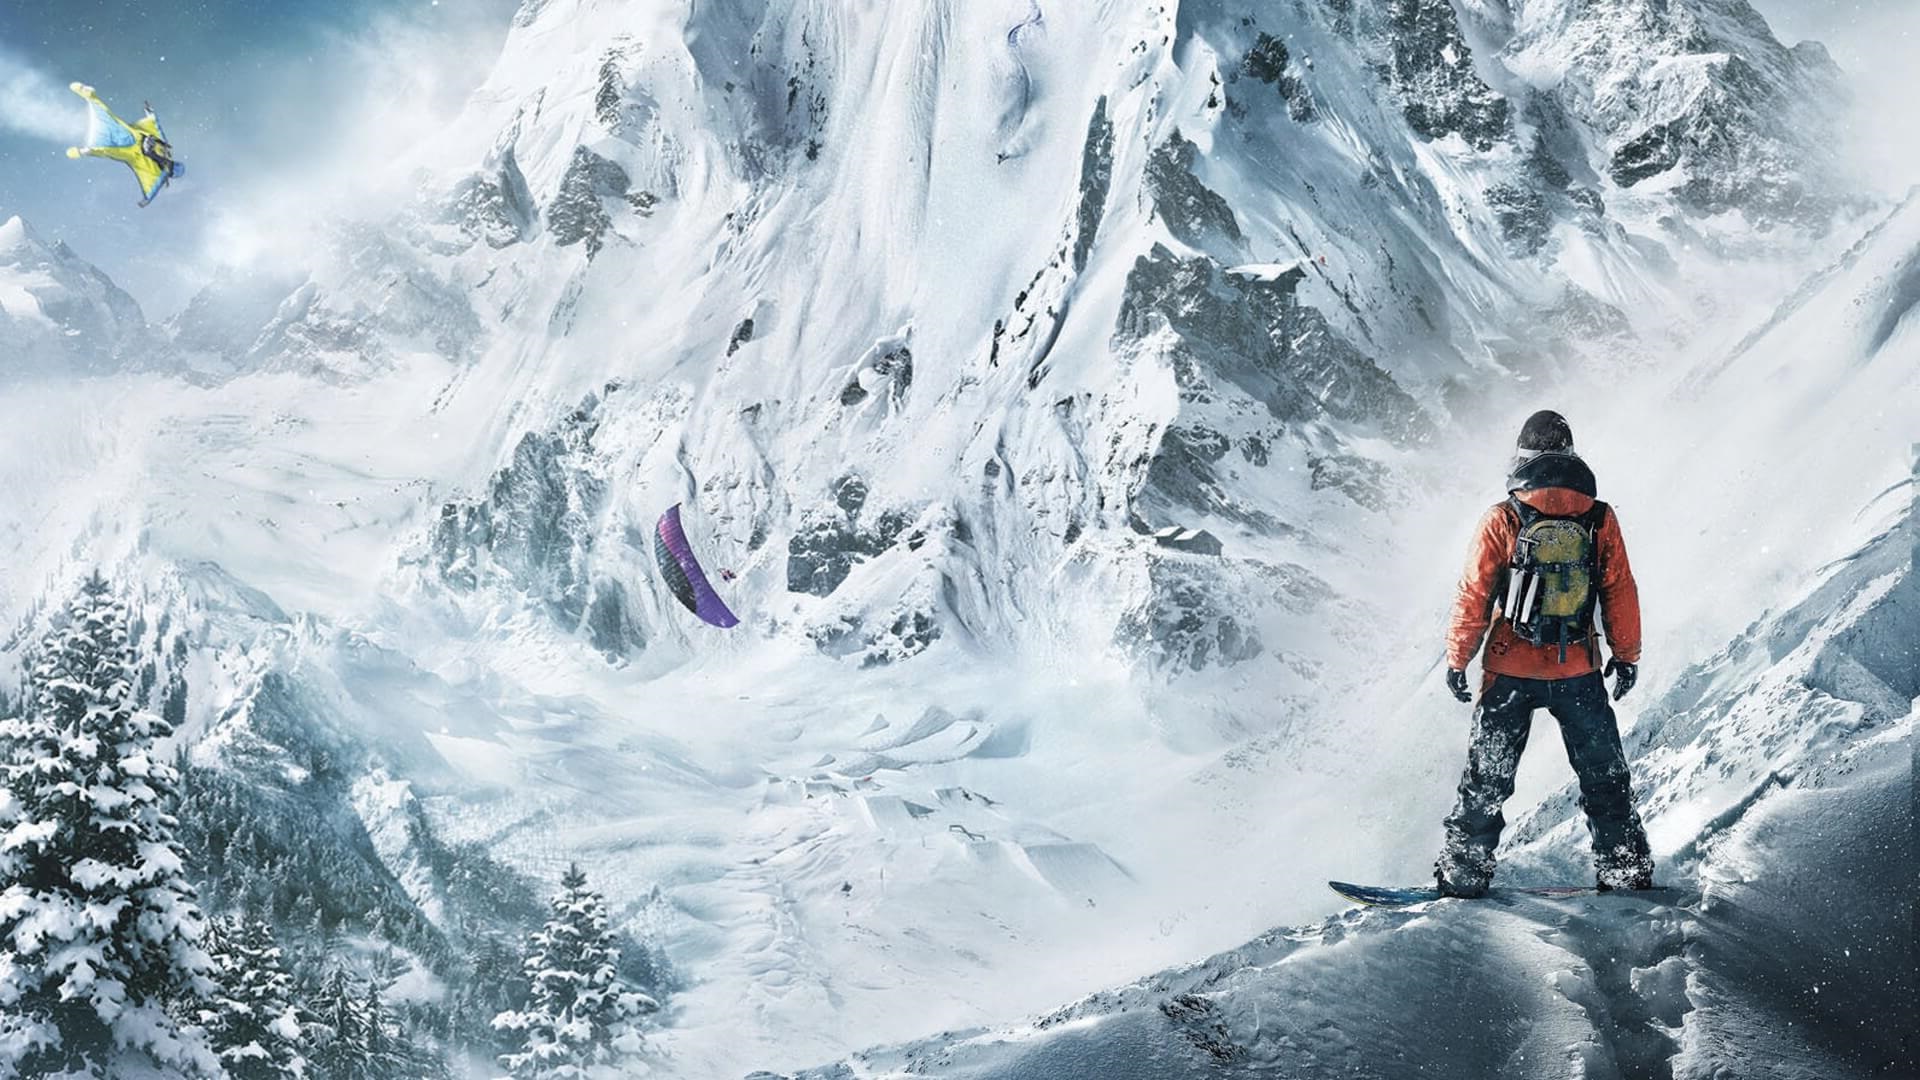 Download Steep PlayStation 4 Game Full Setup File Install Free